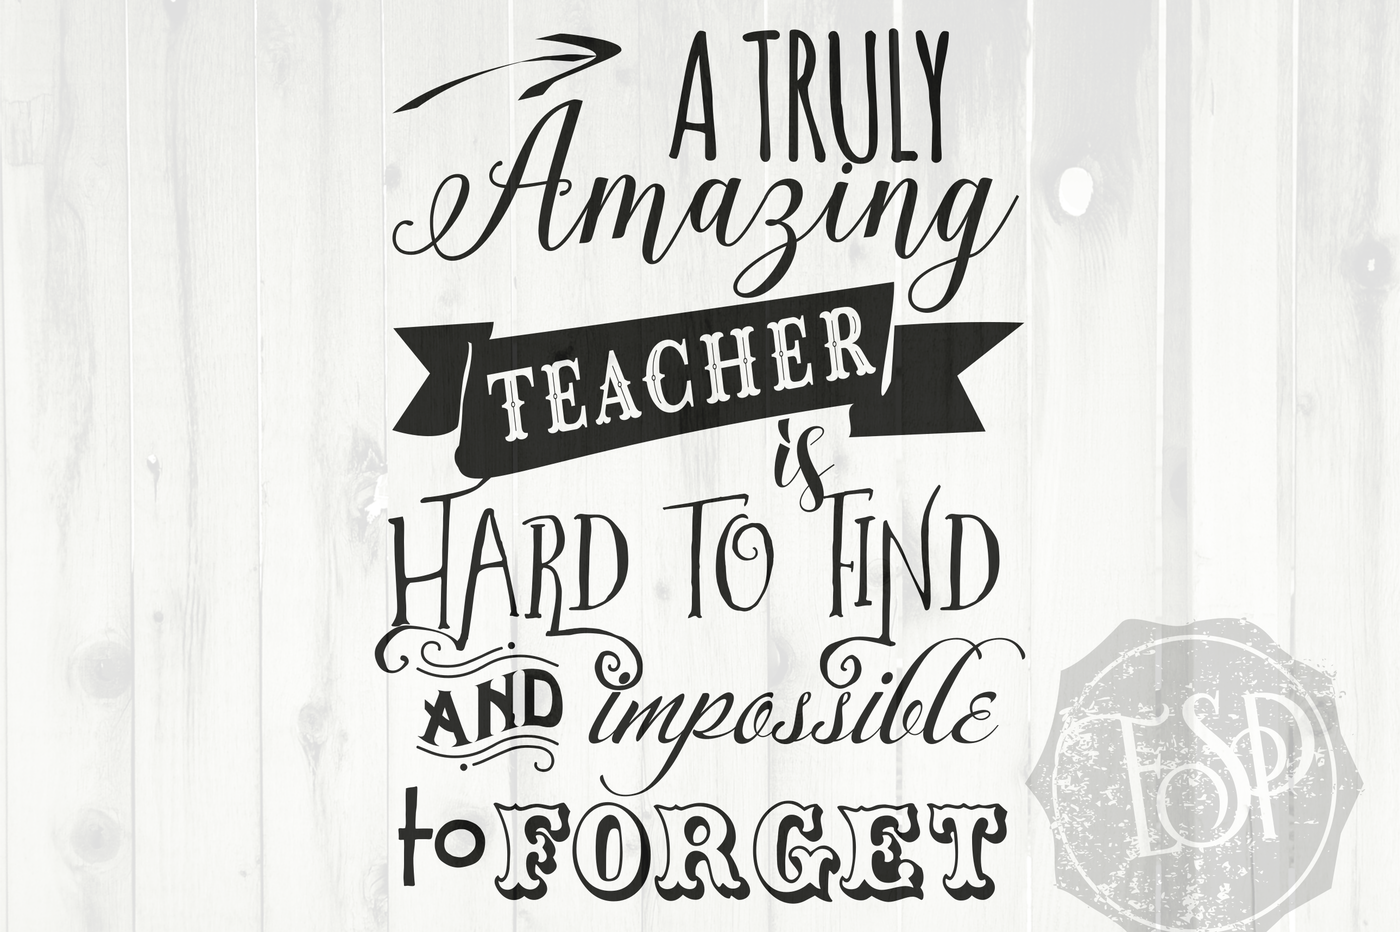 Download A Truly Amazing Teacher, SVG DXF PNG, Cutting File, Printable By Ever So Pretty Designs ...